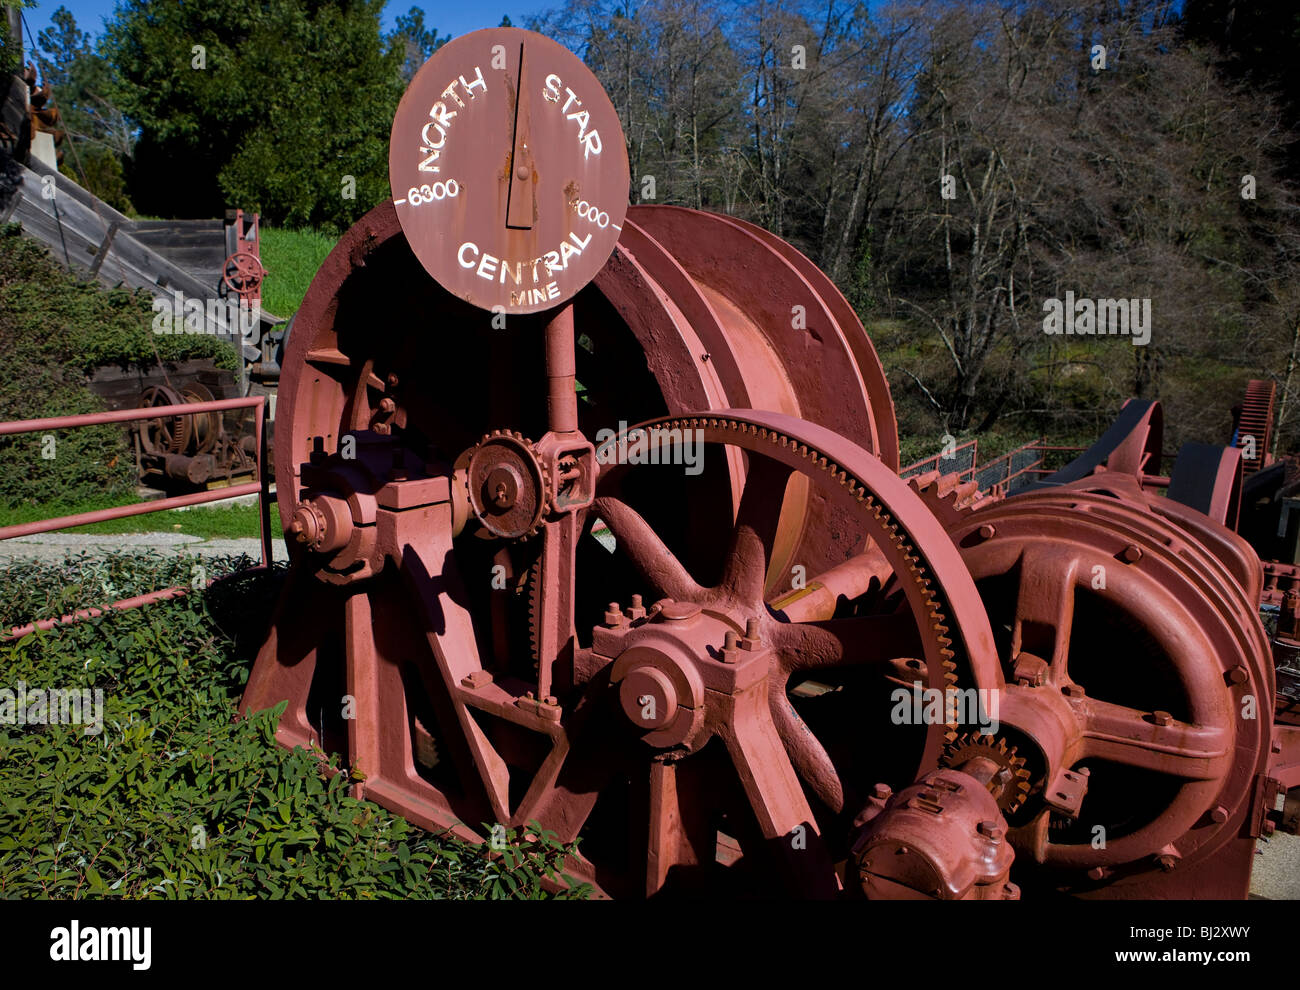 Mining equipment from the North Star Central Mine Company, Grass Valley, California, United States of America Stock Photo